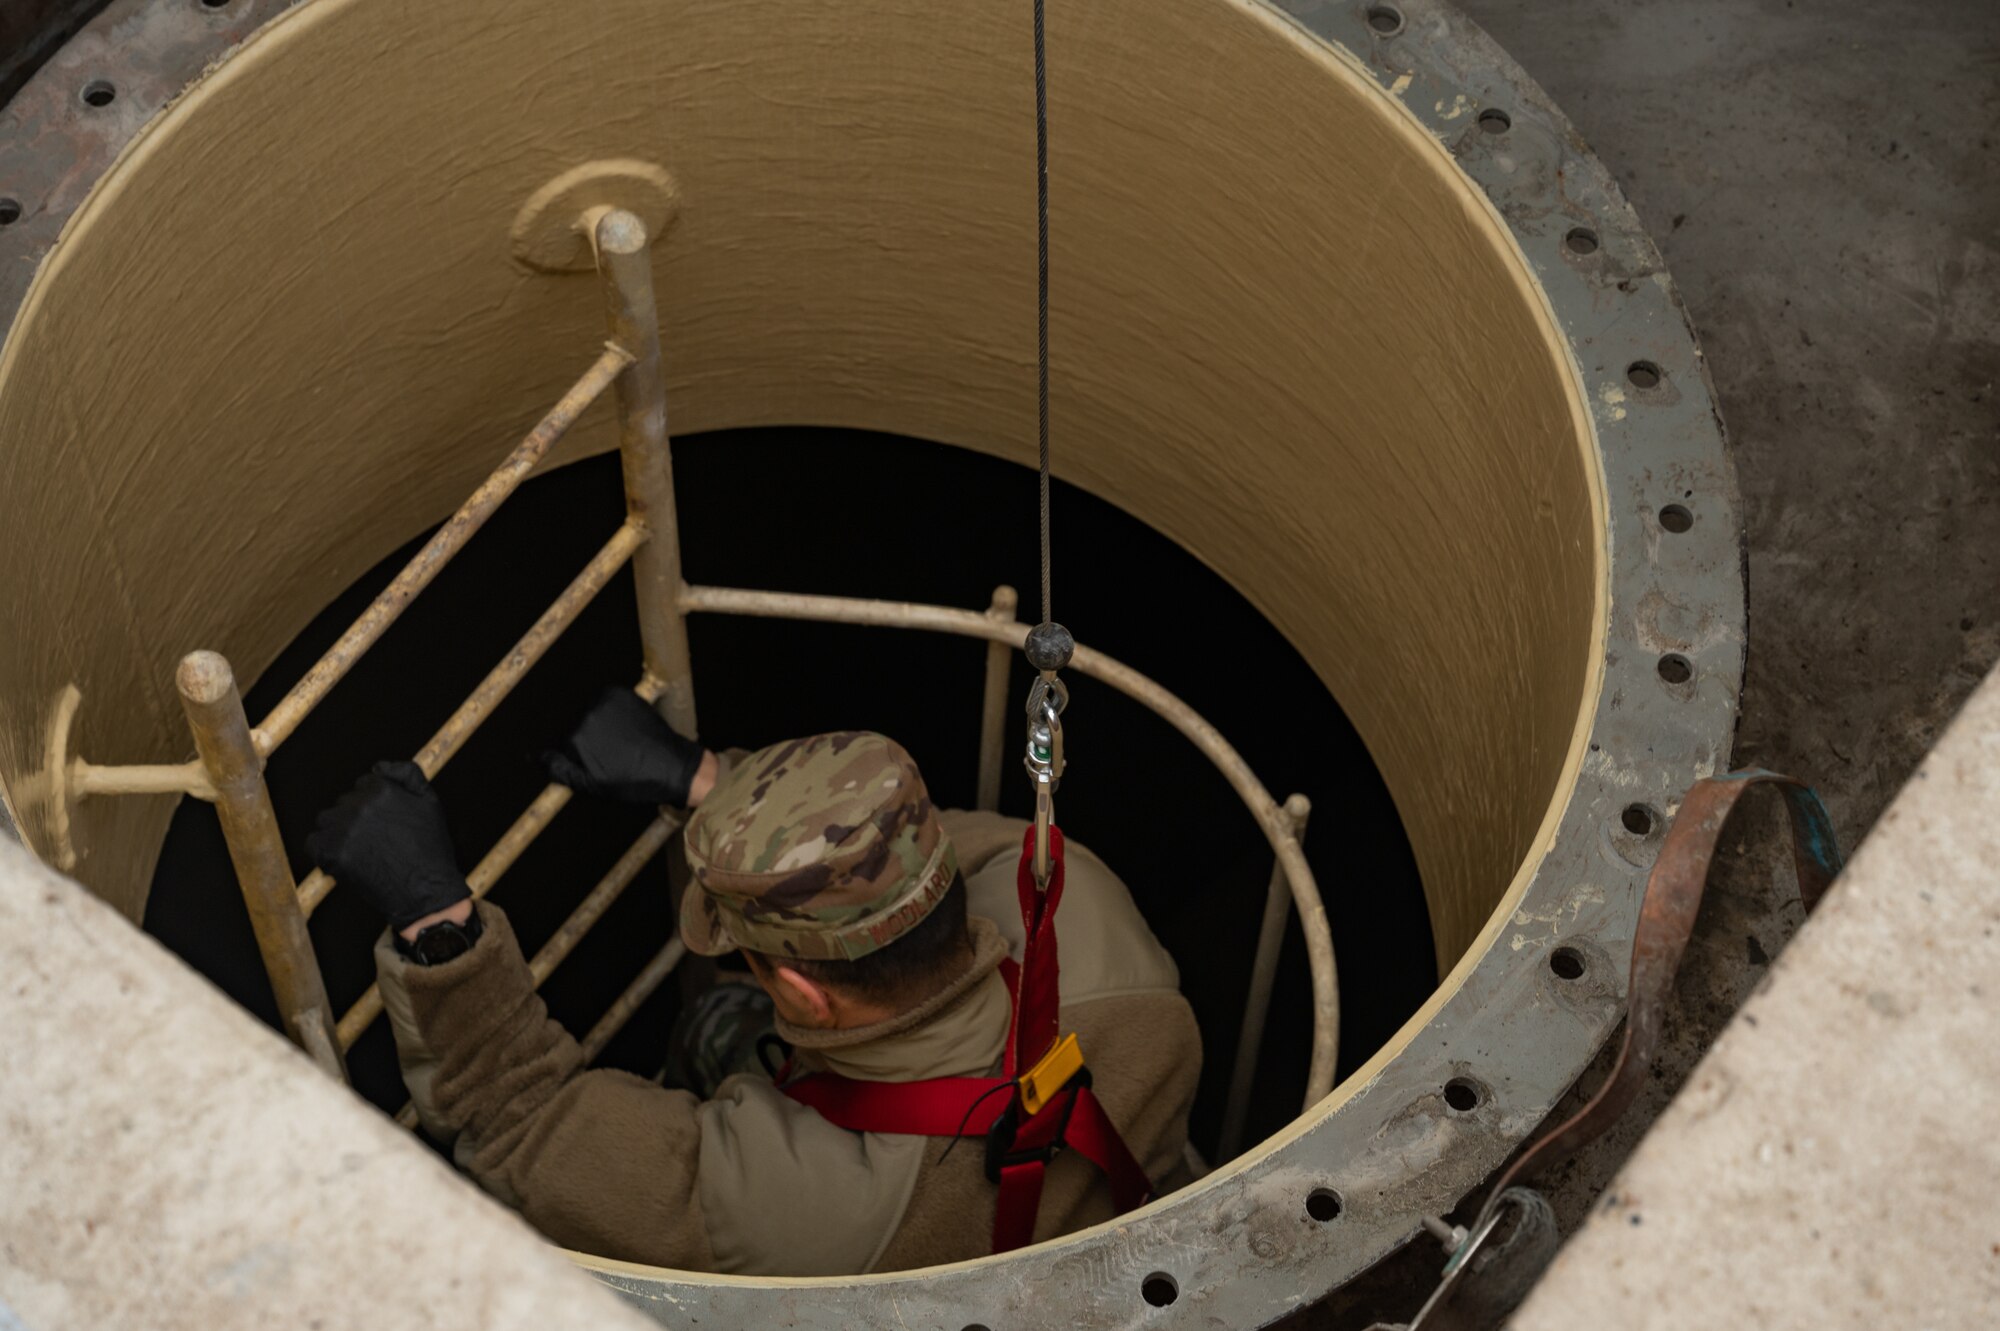 U.S. Air Force Lt. Col. Christopher Woolard, 100th Mission Support Group deputy commander, makes his way down the ladder into an emptied jet fuel storage tank, Feb. 28, 2023, at Royal Air Force Mildenhall, England.